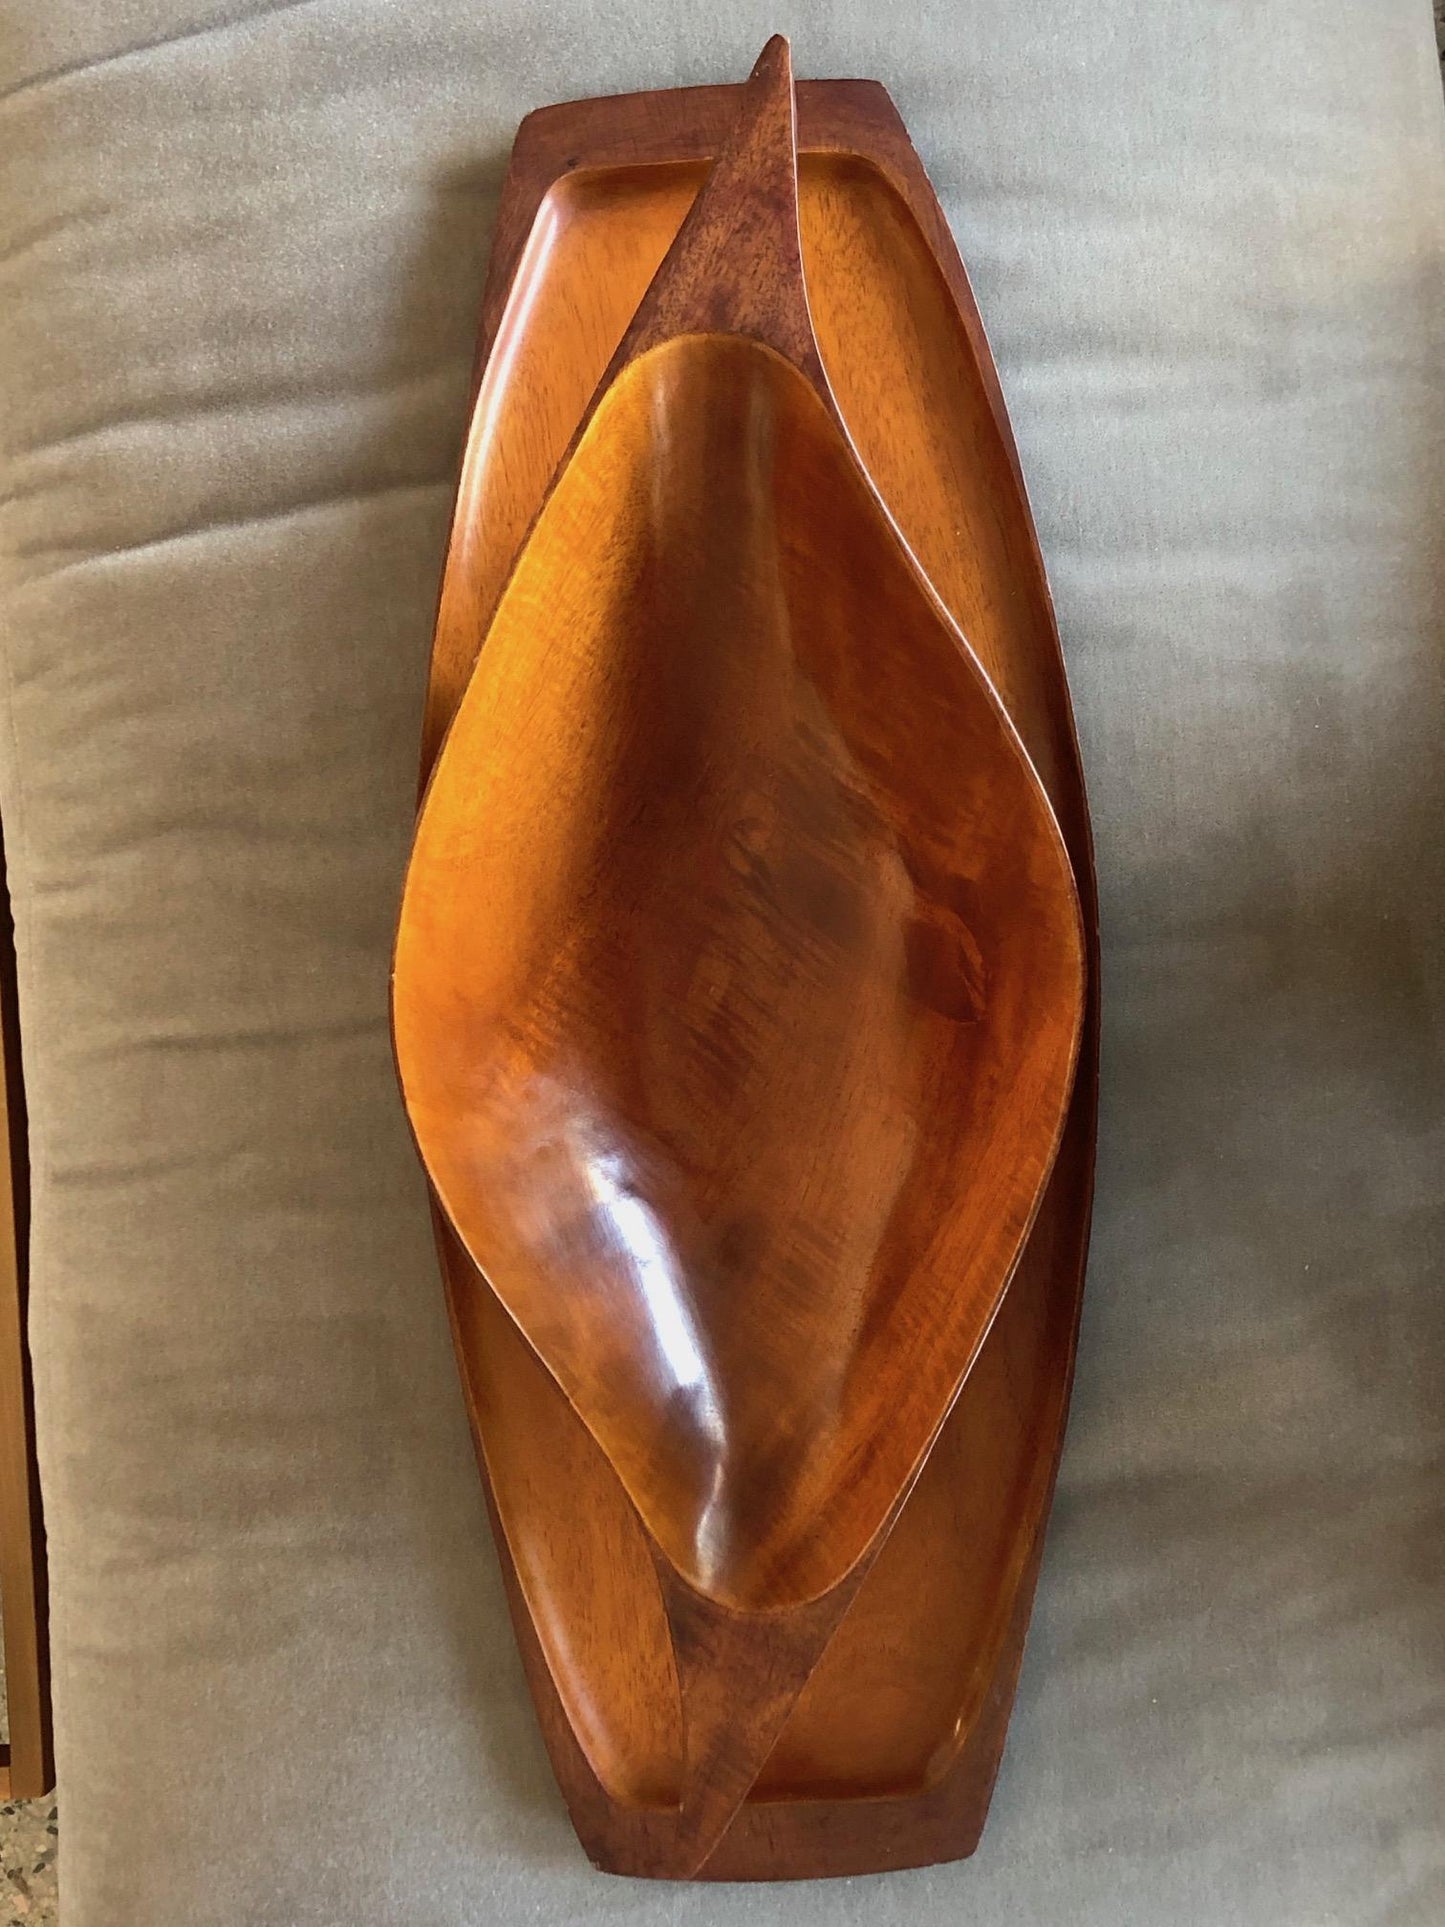 Unusual Carved Mahogany Bowl with Tray